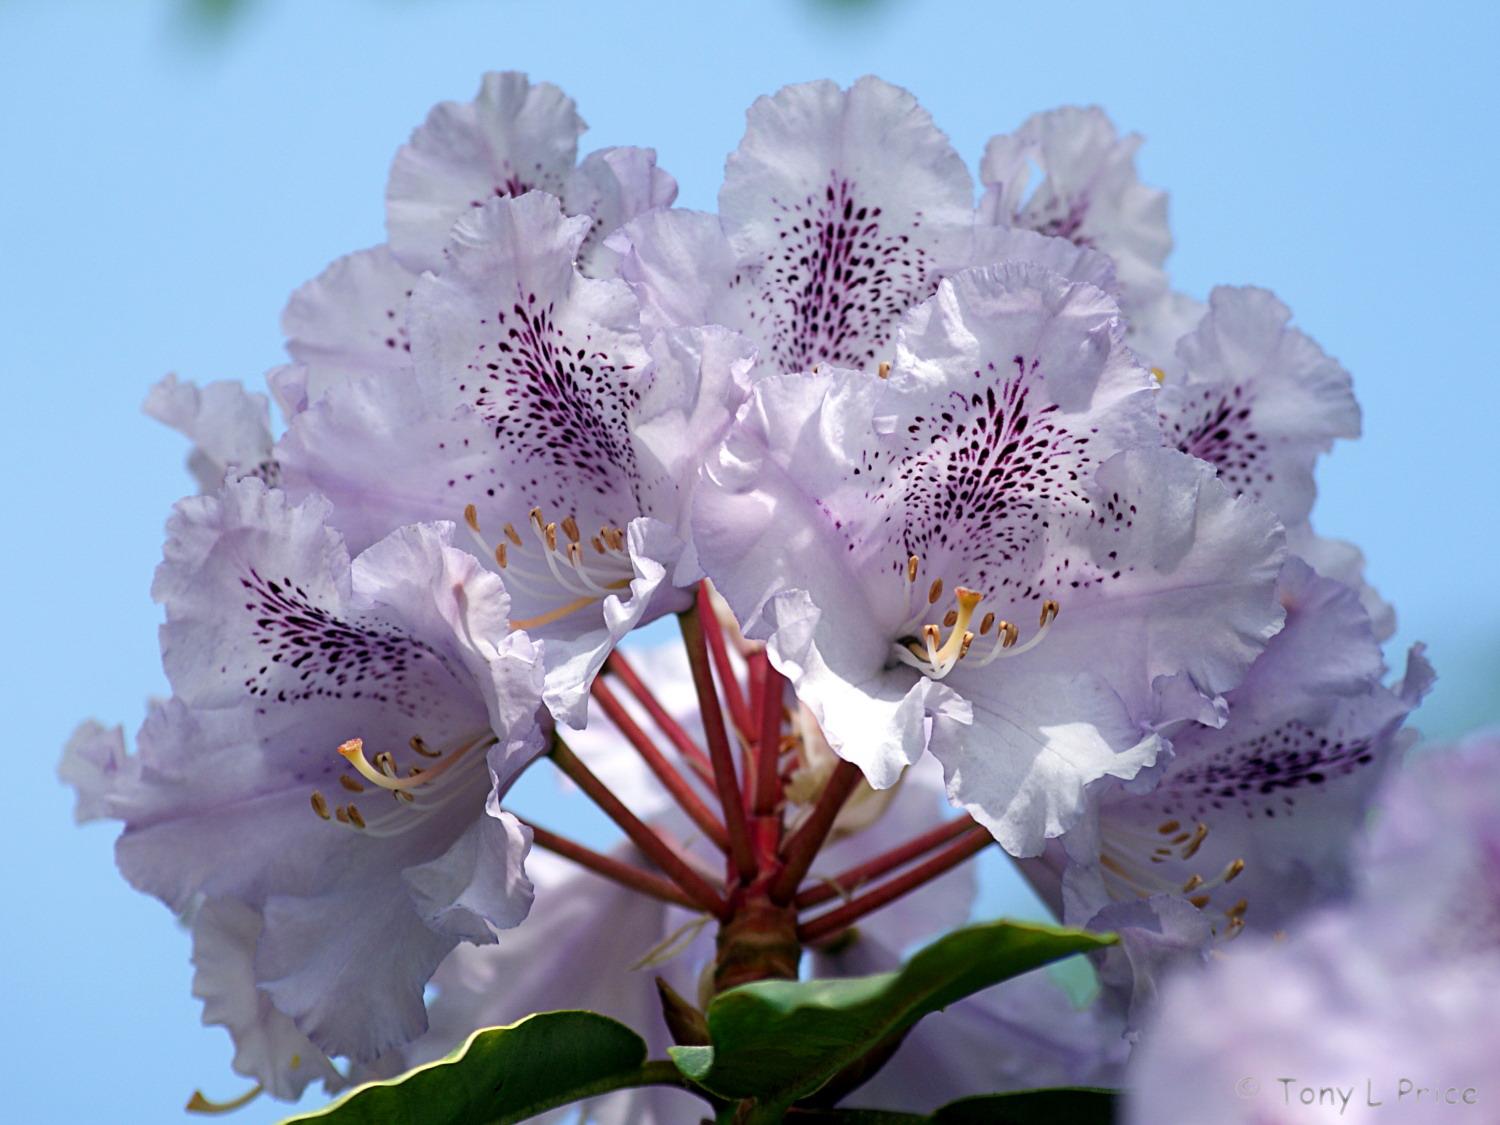 Rhododendron flowering